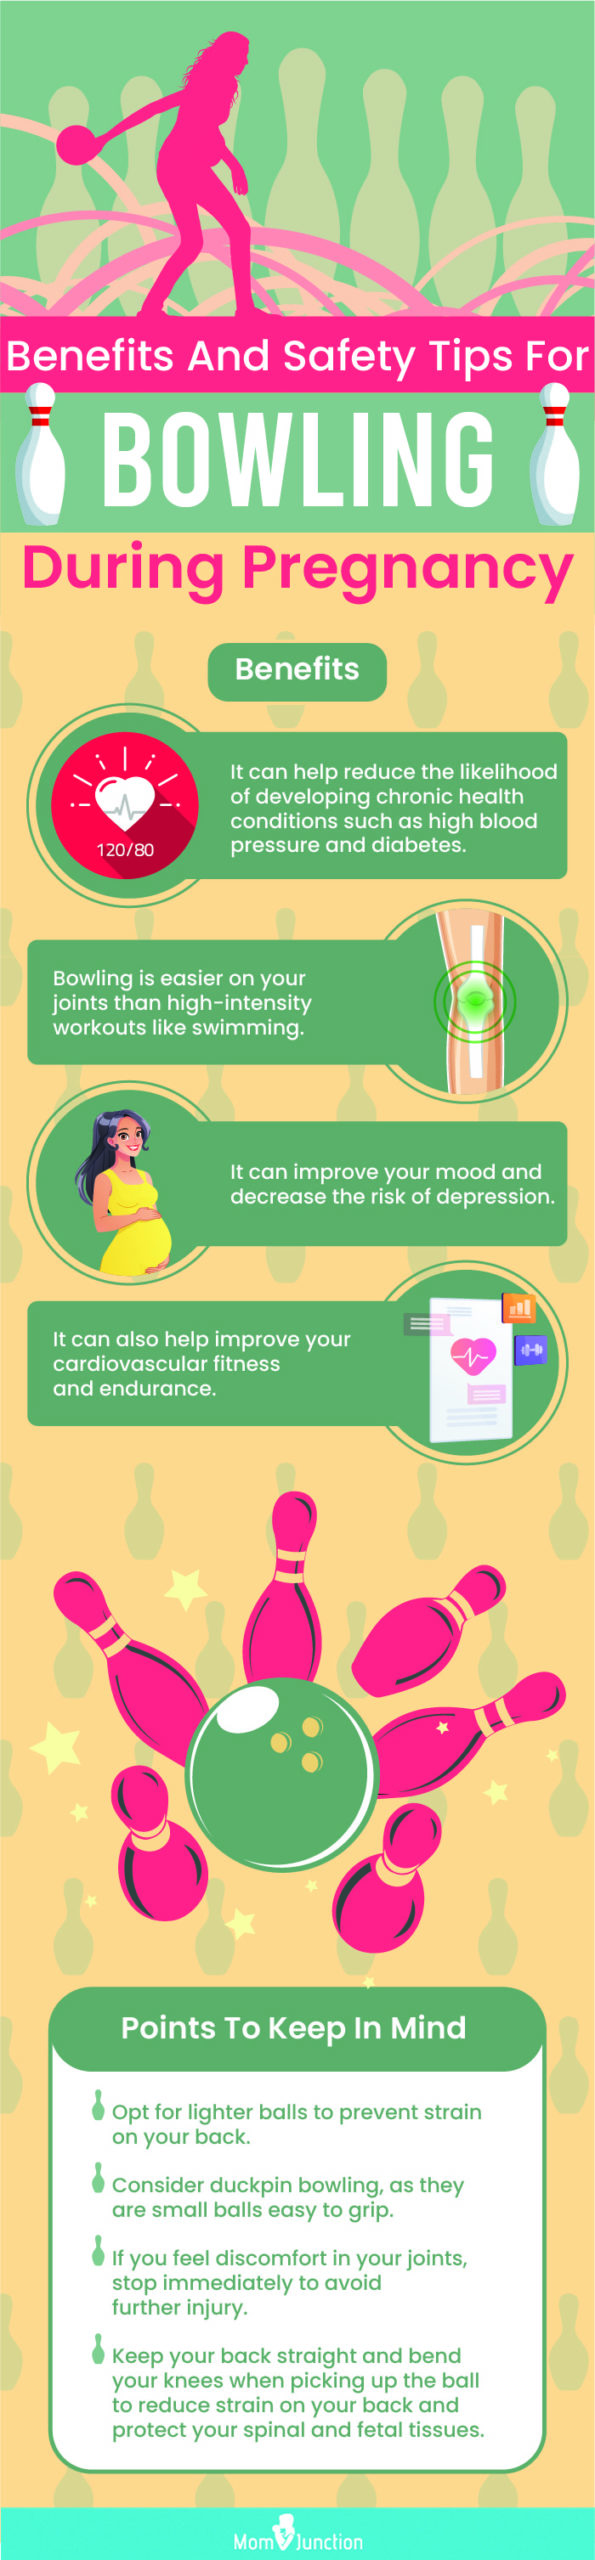 benefits of bowling during pregnancy (infographic)